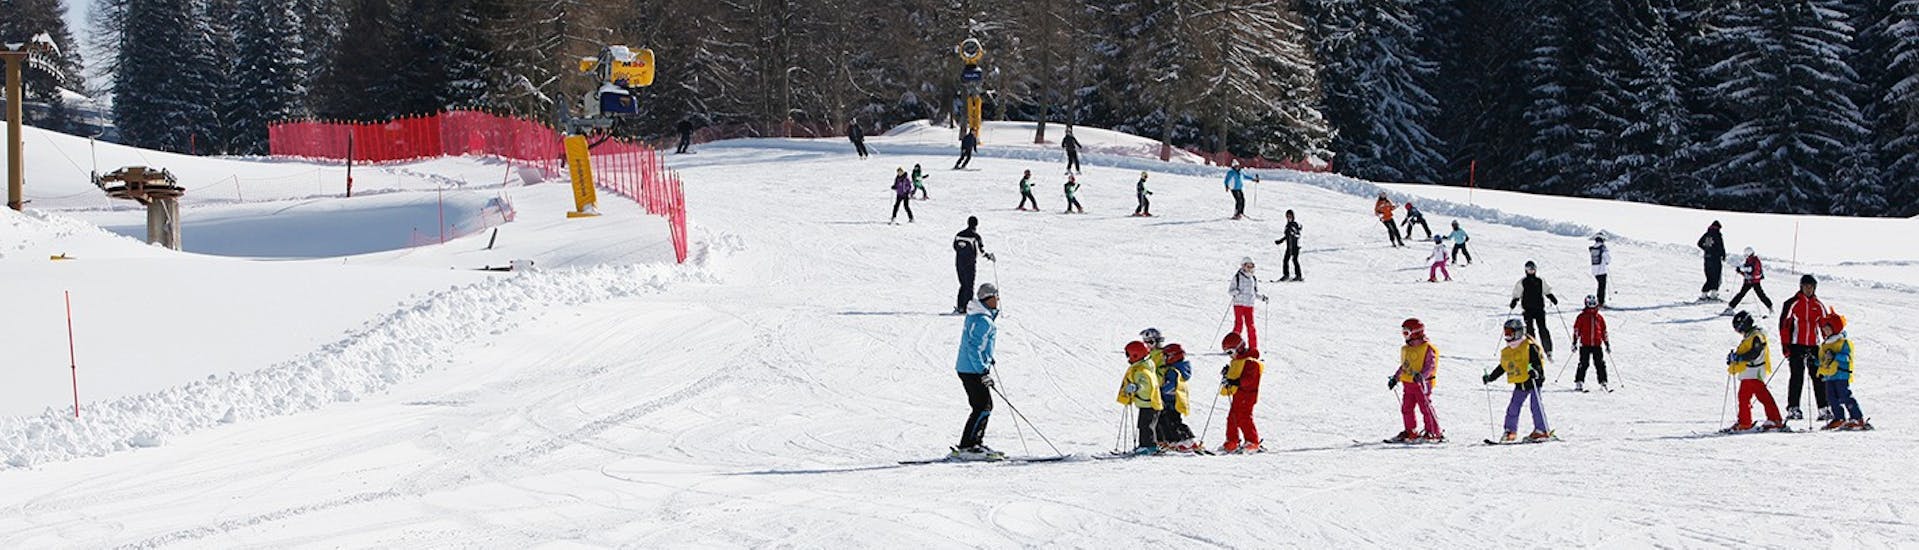 Slopes where the Kids Ski Lessons (6-14 y.) for Experienced Skiers - Full Day with Scuola Italiana Sci Folgaria-Serrada take place.